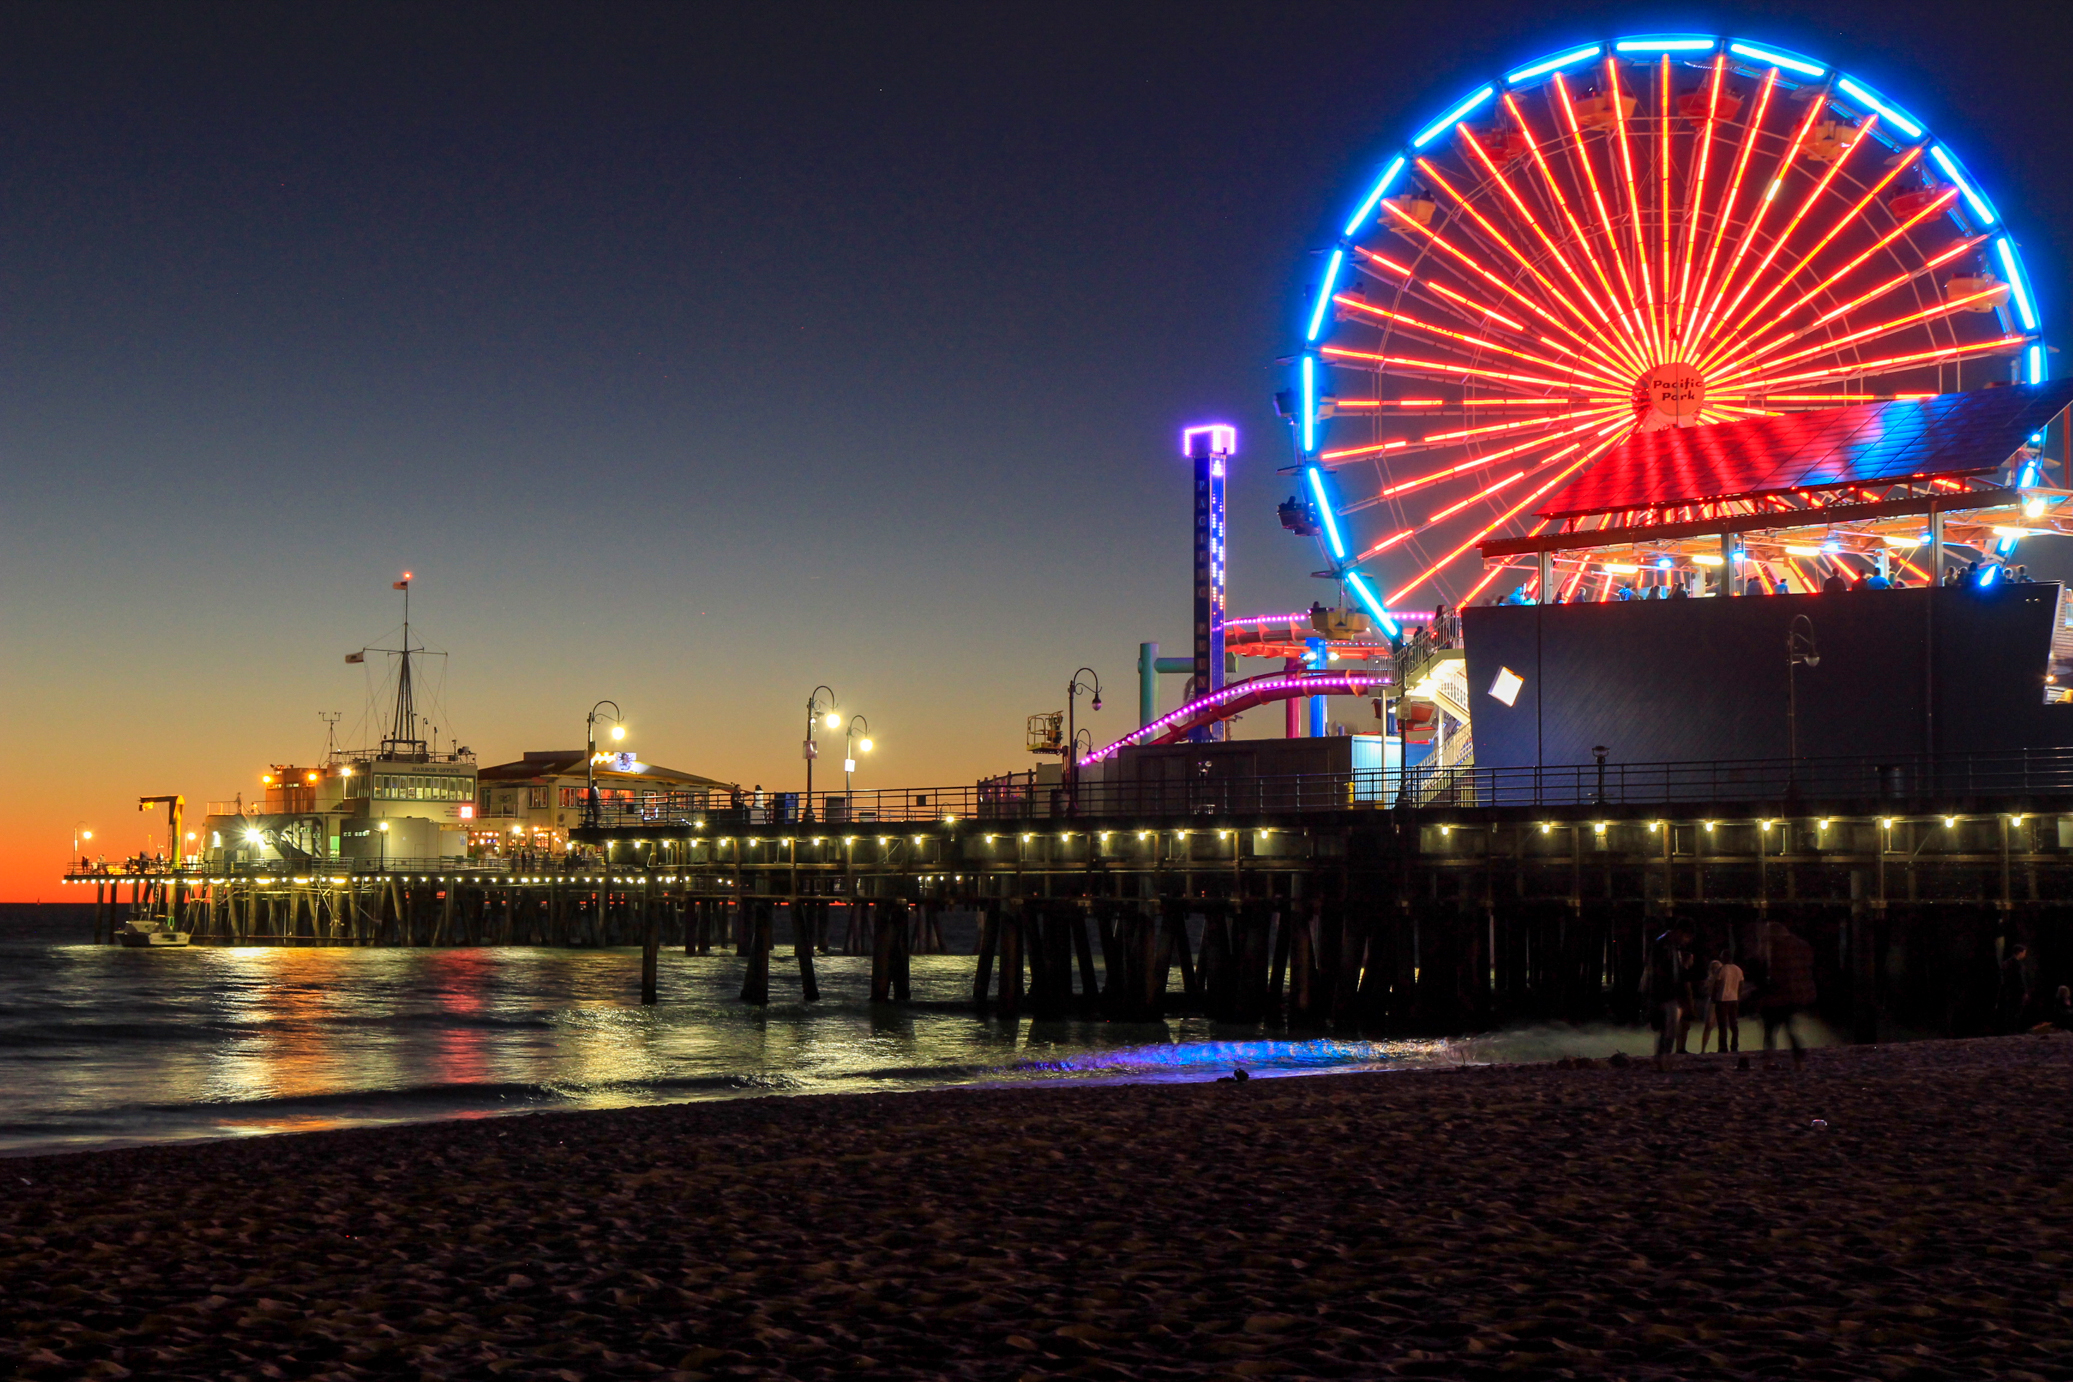 Santa Monica Pier at night, perfect for a fun evening $20 Date night in Los Angeles